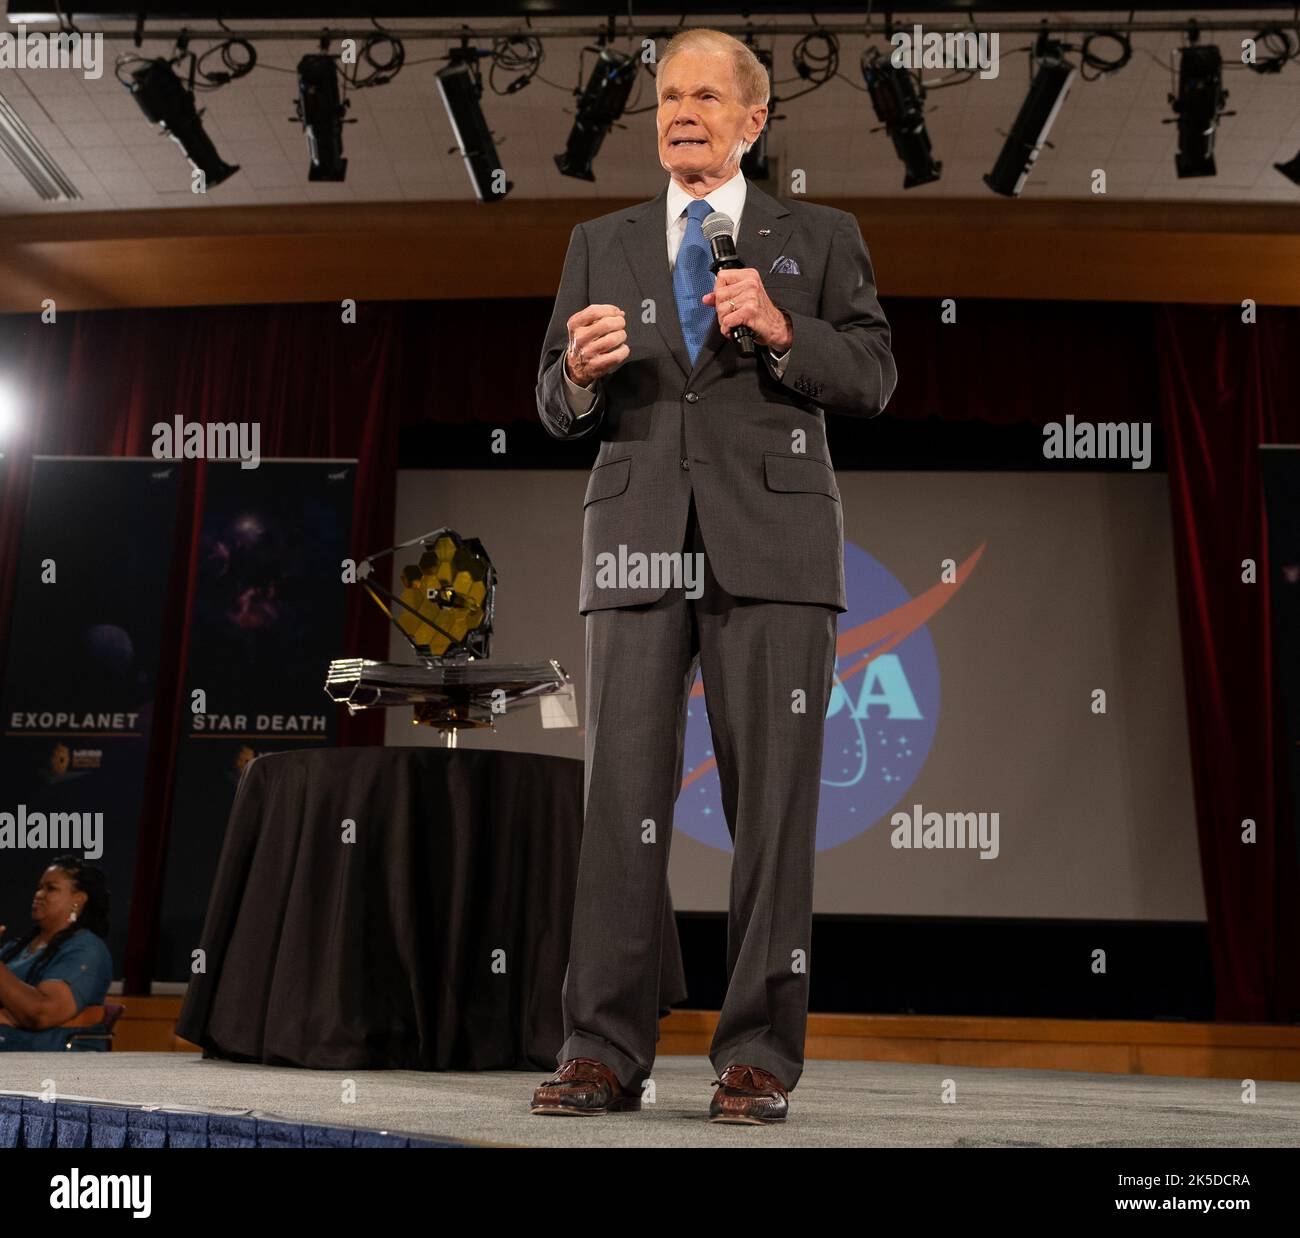 NASA Administrator Bill Nelson delivers remarks ahead of the release of the first images from NASA’s James Webb Space Telescope, Tuesday, July 12, 2022, at NASA’s Goddard Space Flight Center in Greenbelt, Md.  The first full-color images and spectroscopic data from the James Webb Space Telescope, a partnership with ESA (European Space Agency) and the Canadian Space Agency (CSA), are a demonstration of the power of Webb as the telescope begins its science mission to unfold the infrared universe. Stock Photo